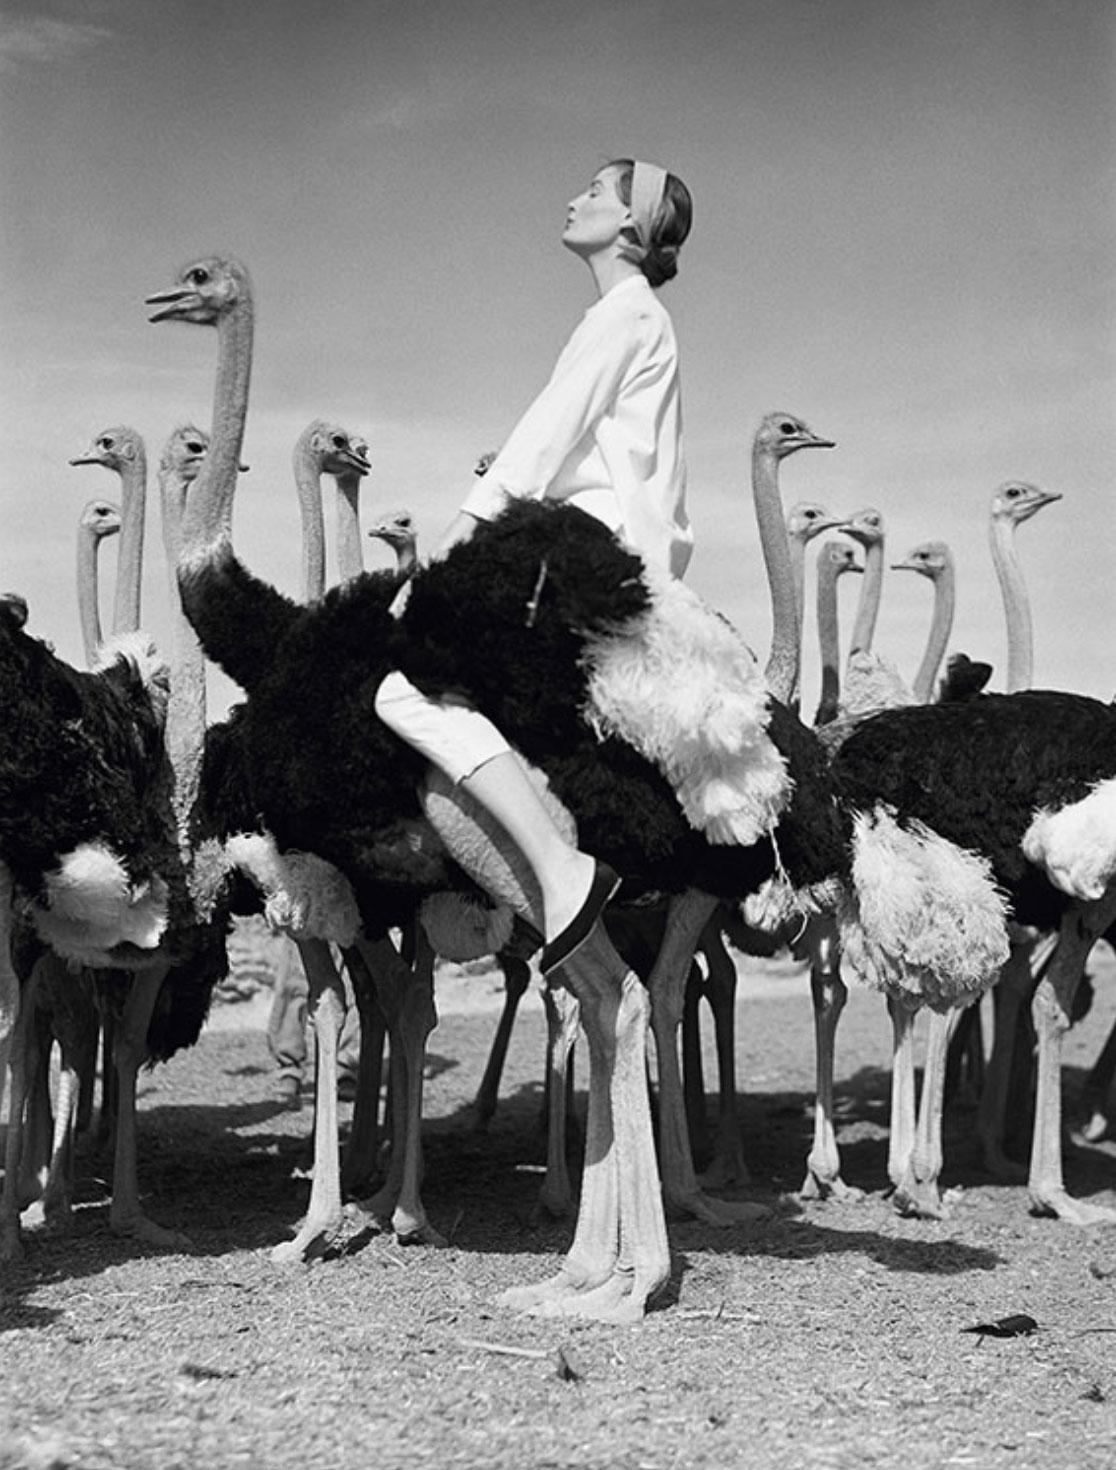 Norman Parkinson
Wenda and Ostriches
1951 (printed later)
C print
60 x 40 inches 
Estate stamped and numbered edition of 21 on verso

British fashion model Wenda Parkinson and ostriches, fashion by Spectator Sports. Photographed in South Africa for